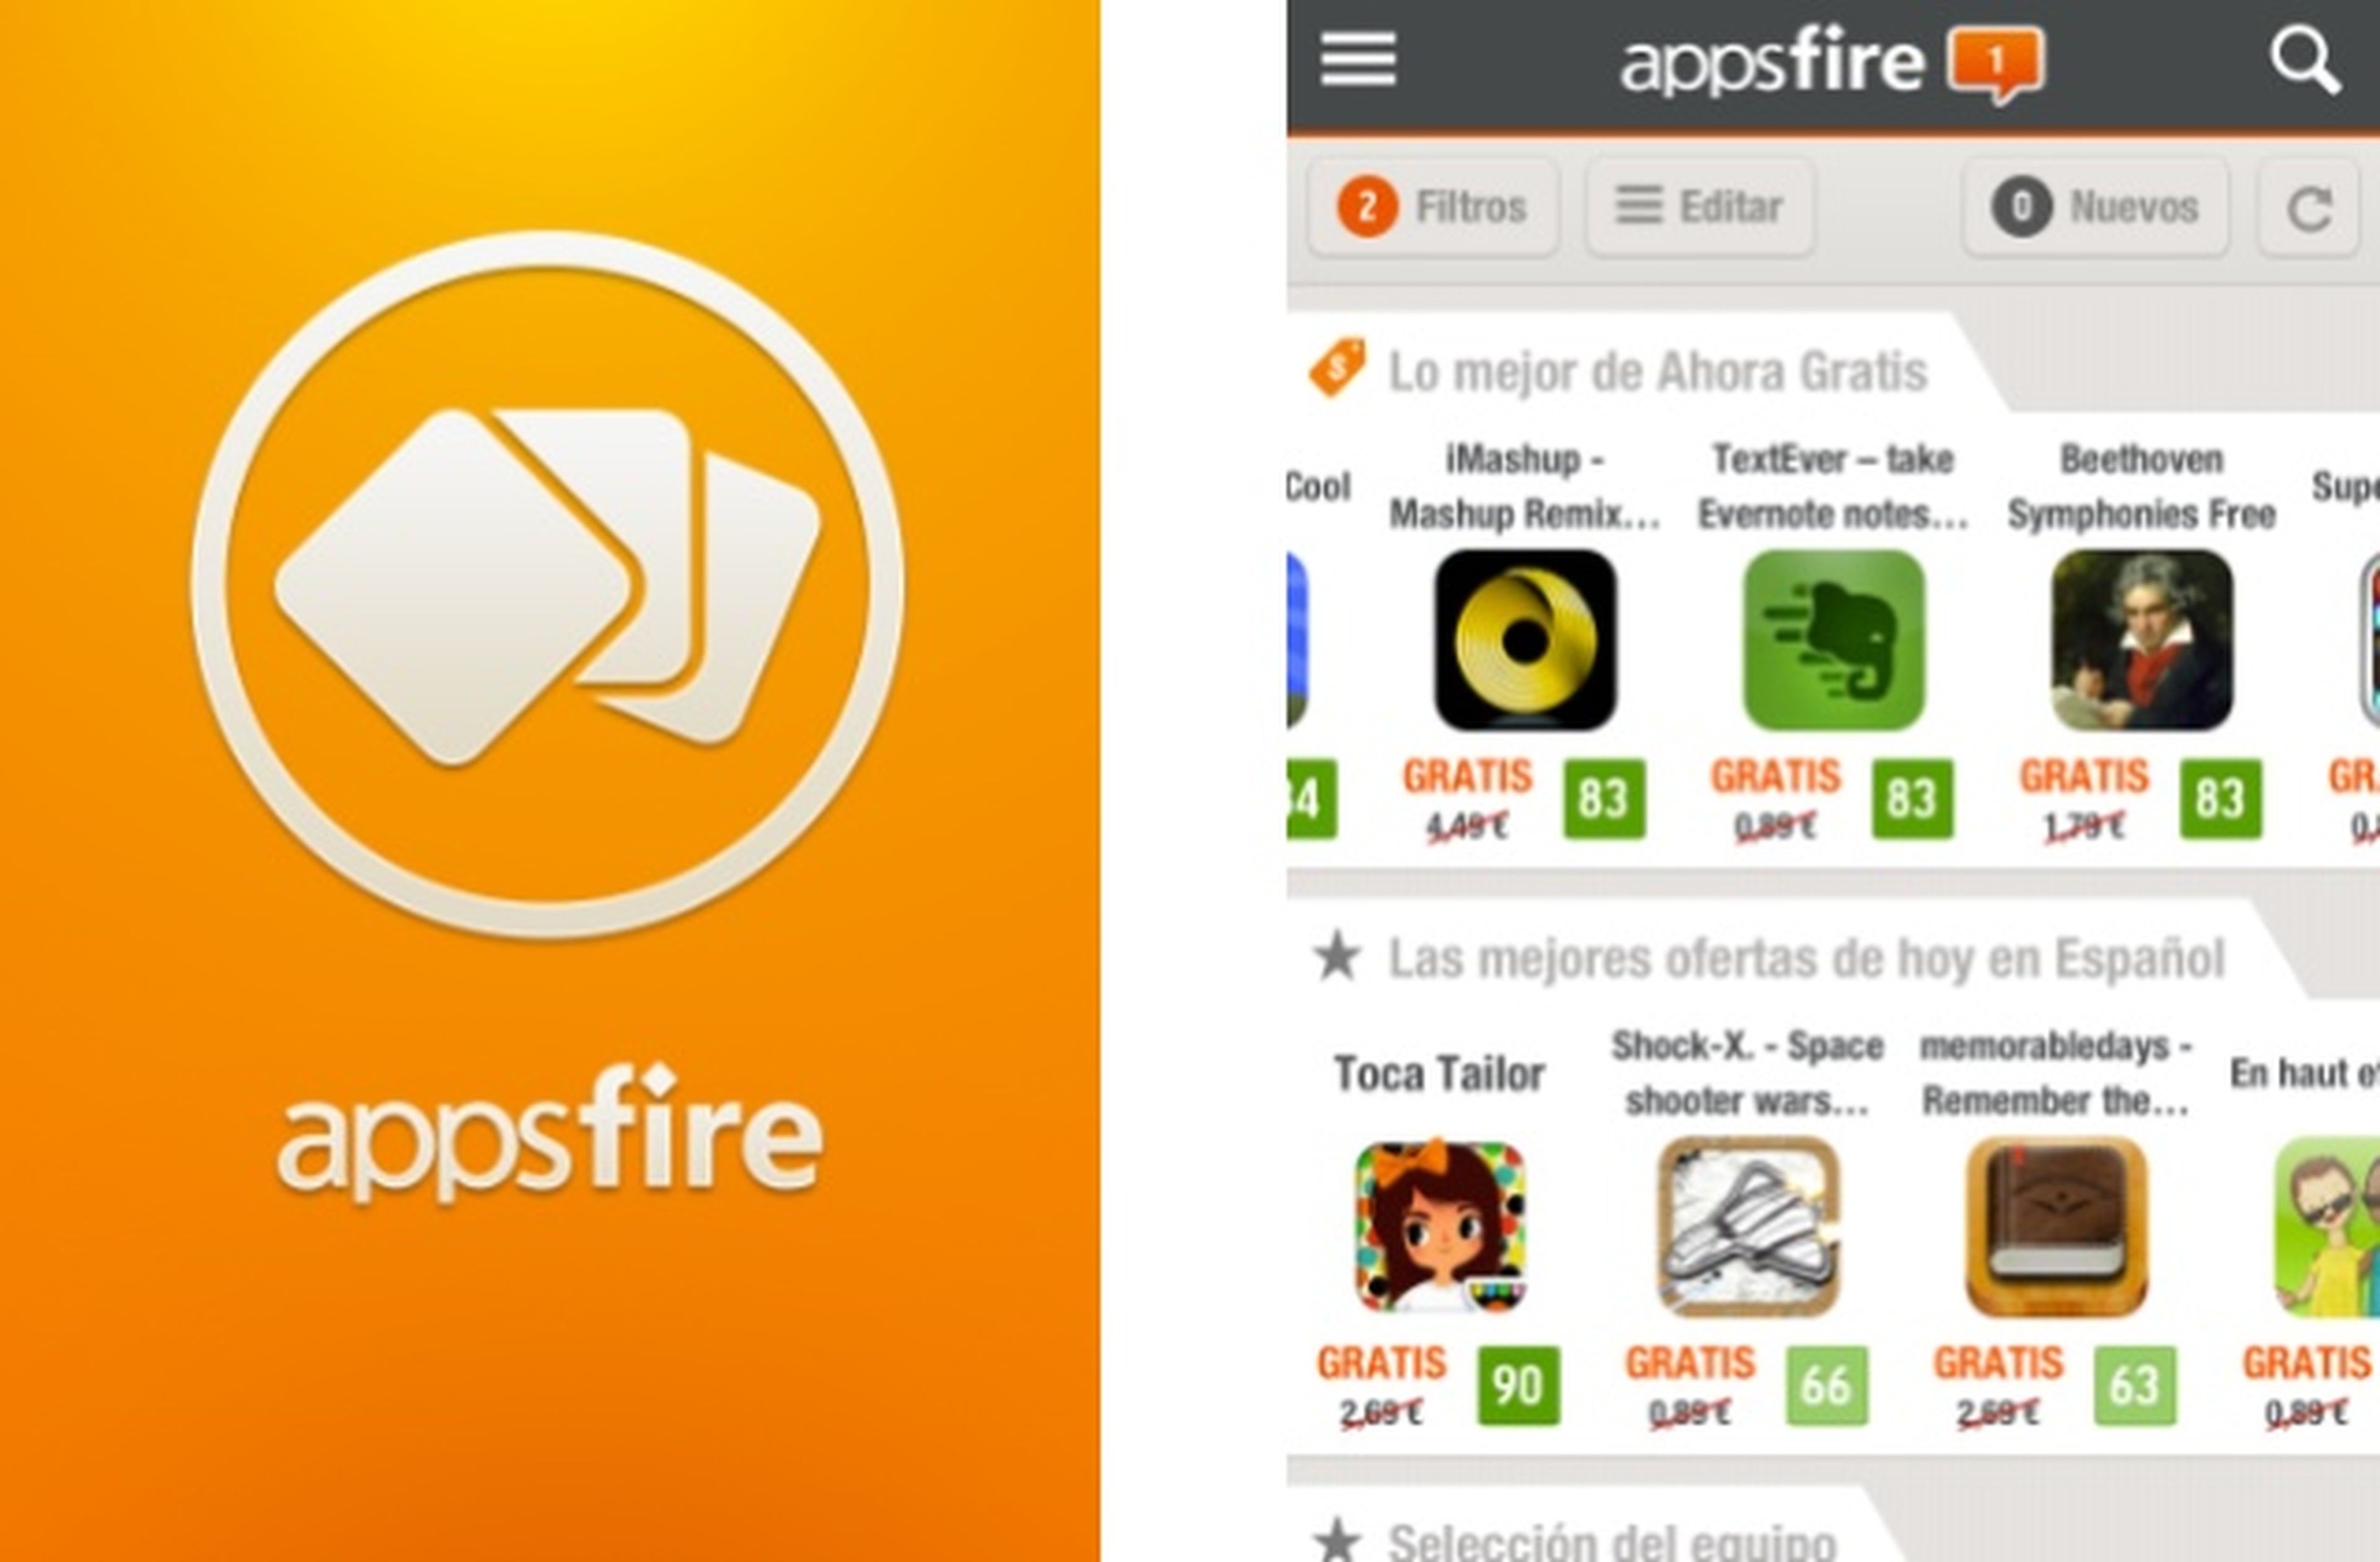 Appsfire